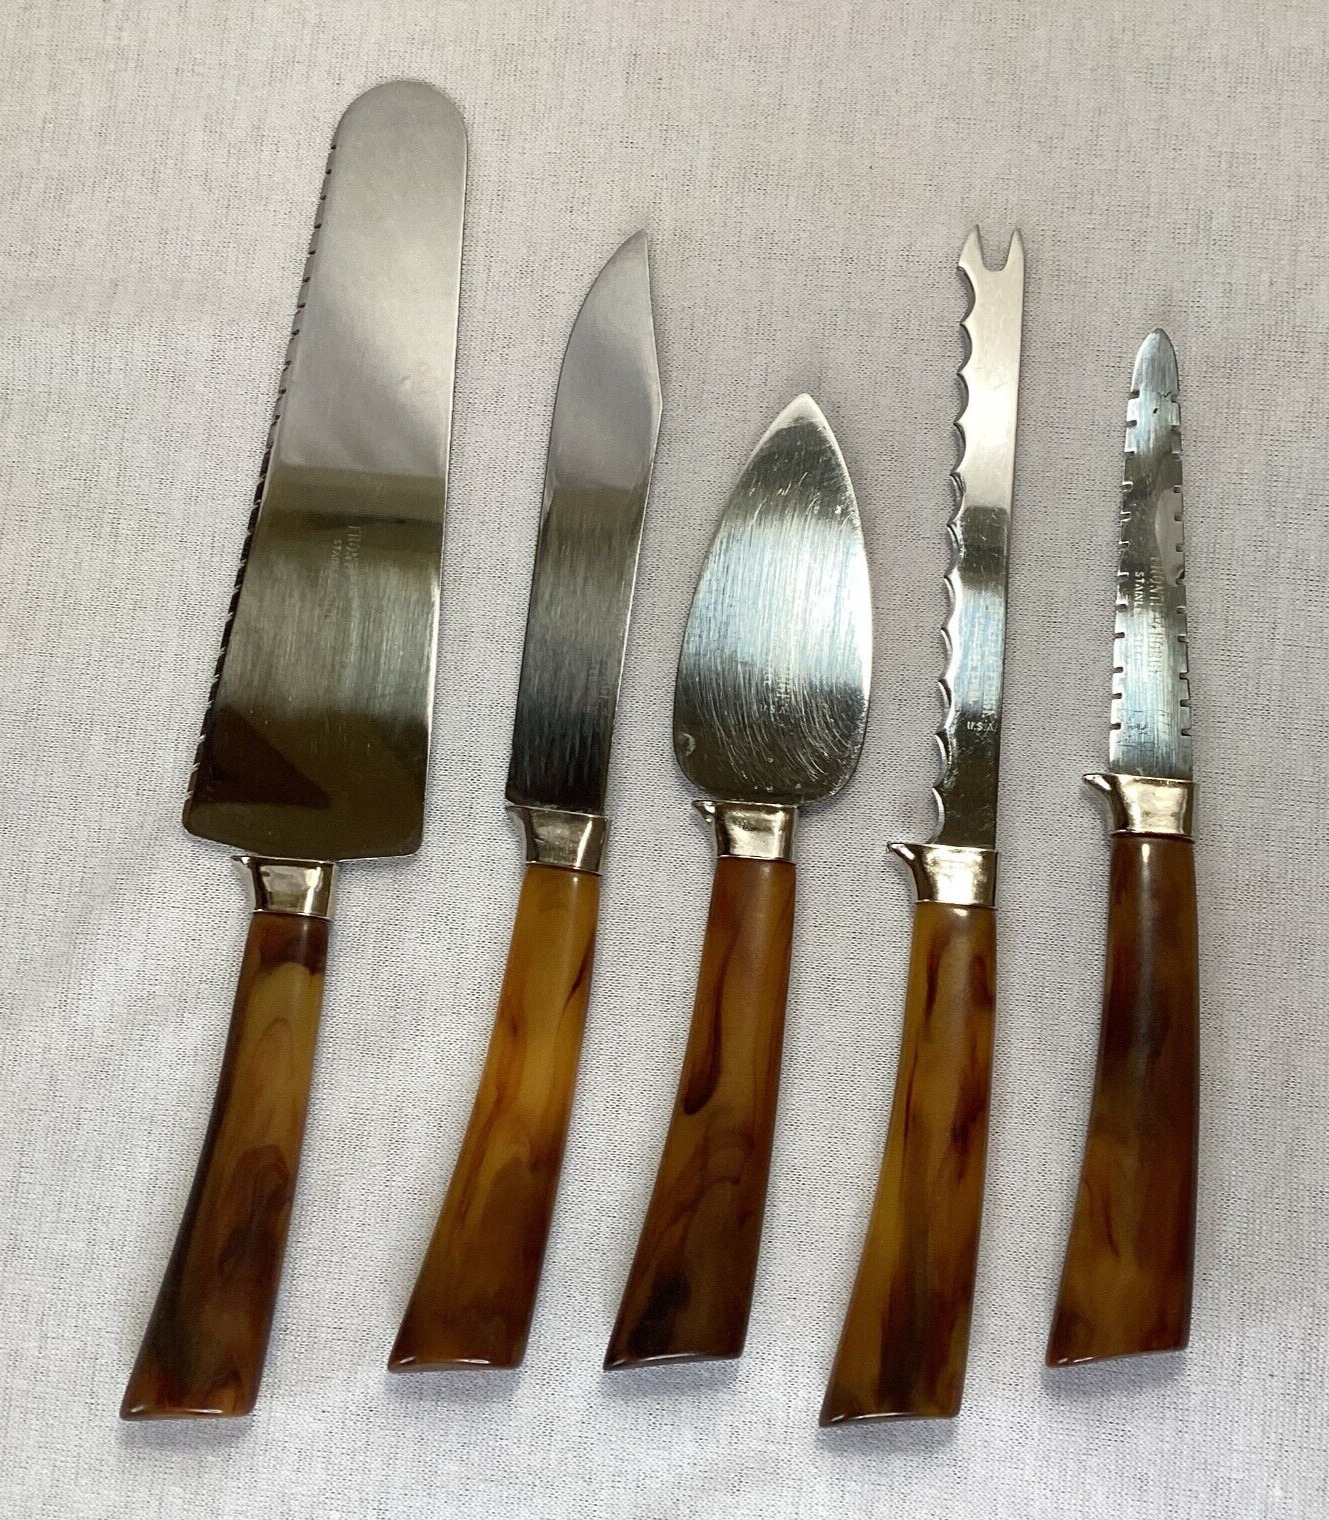 Vintage 5 pc Frontier Forge Knife Set Stainless Bakelite? Marbled Handles